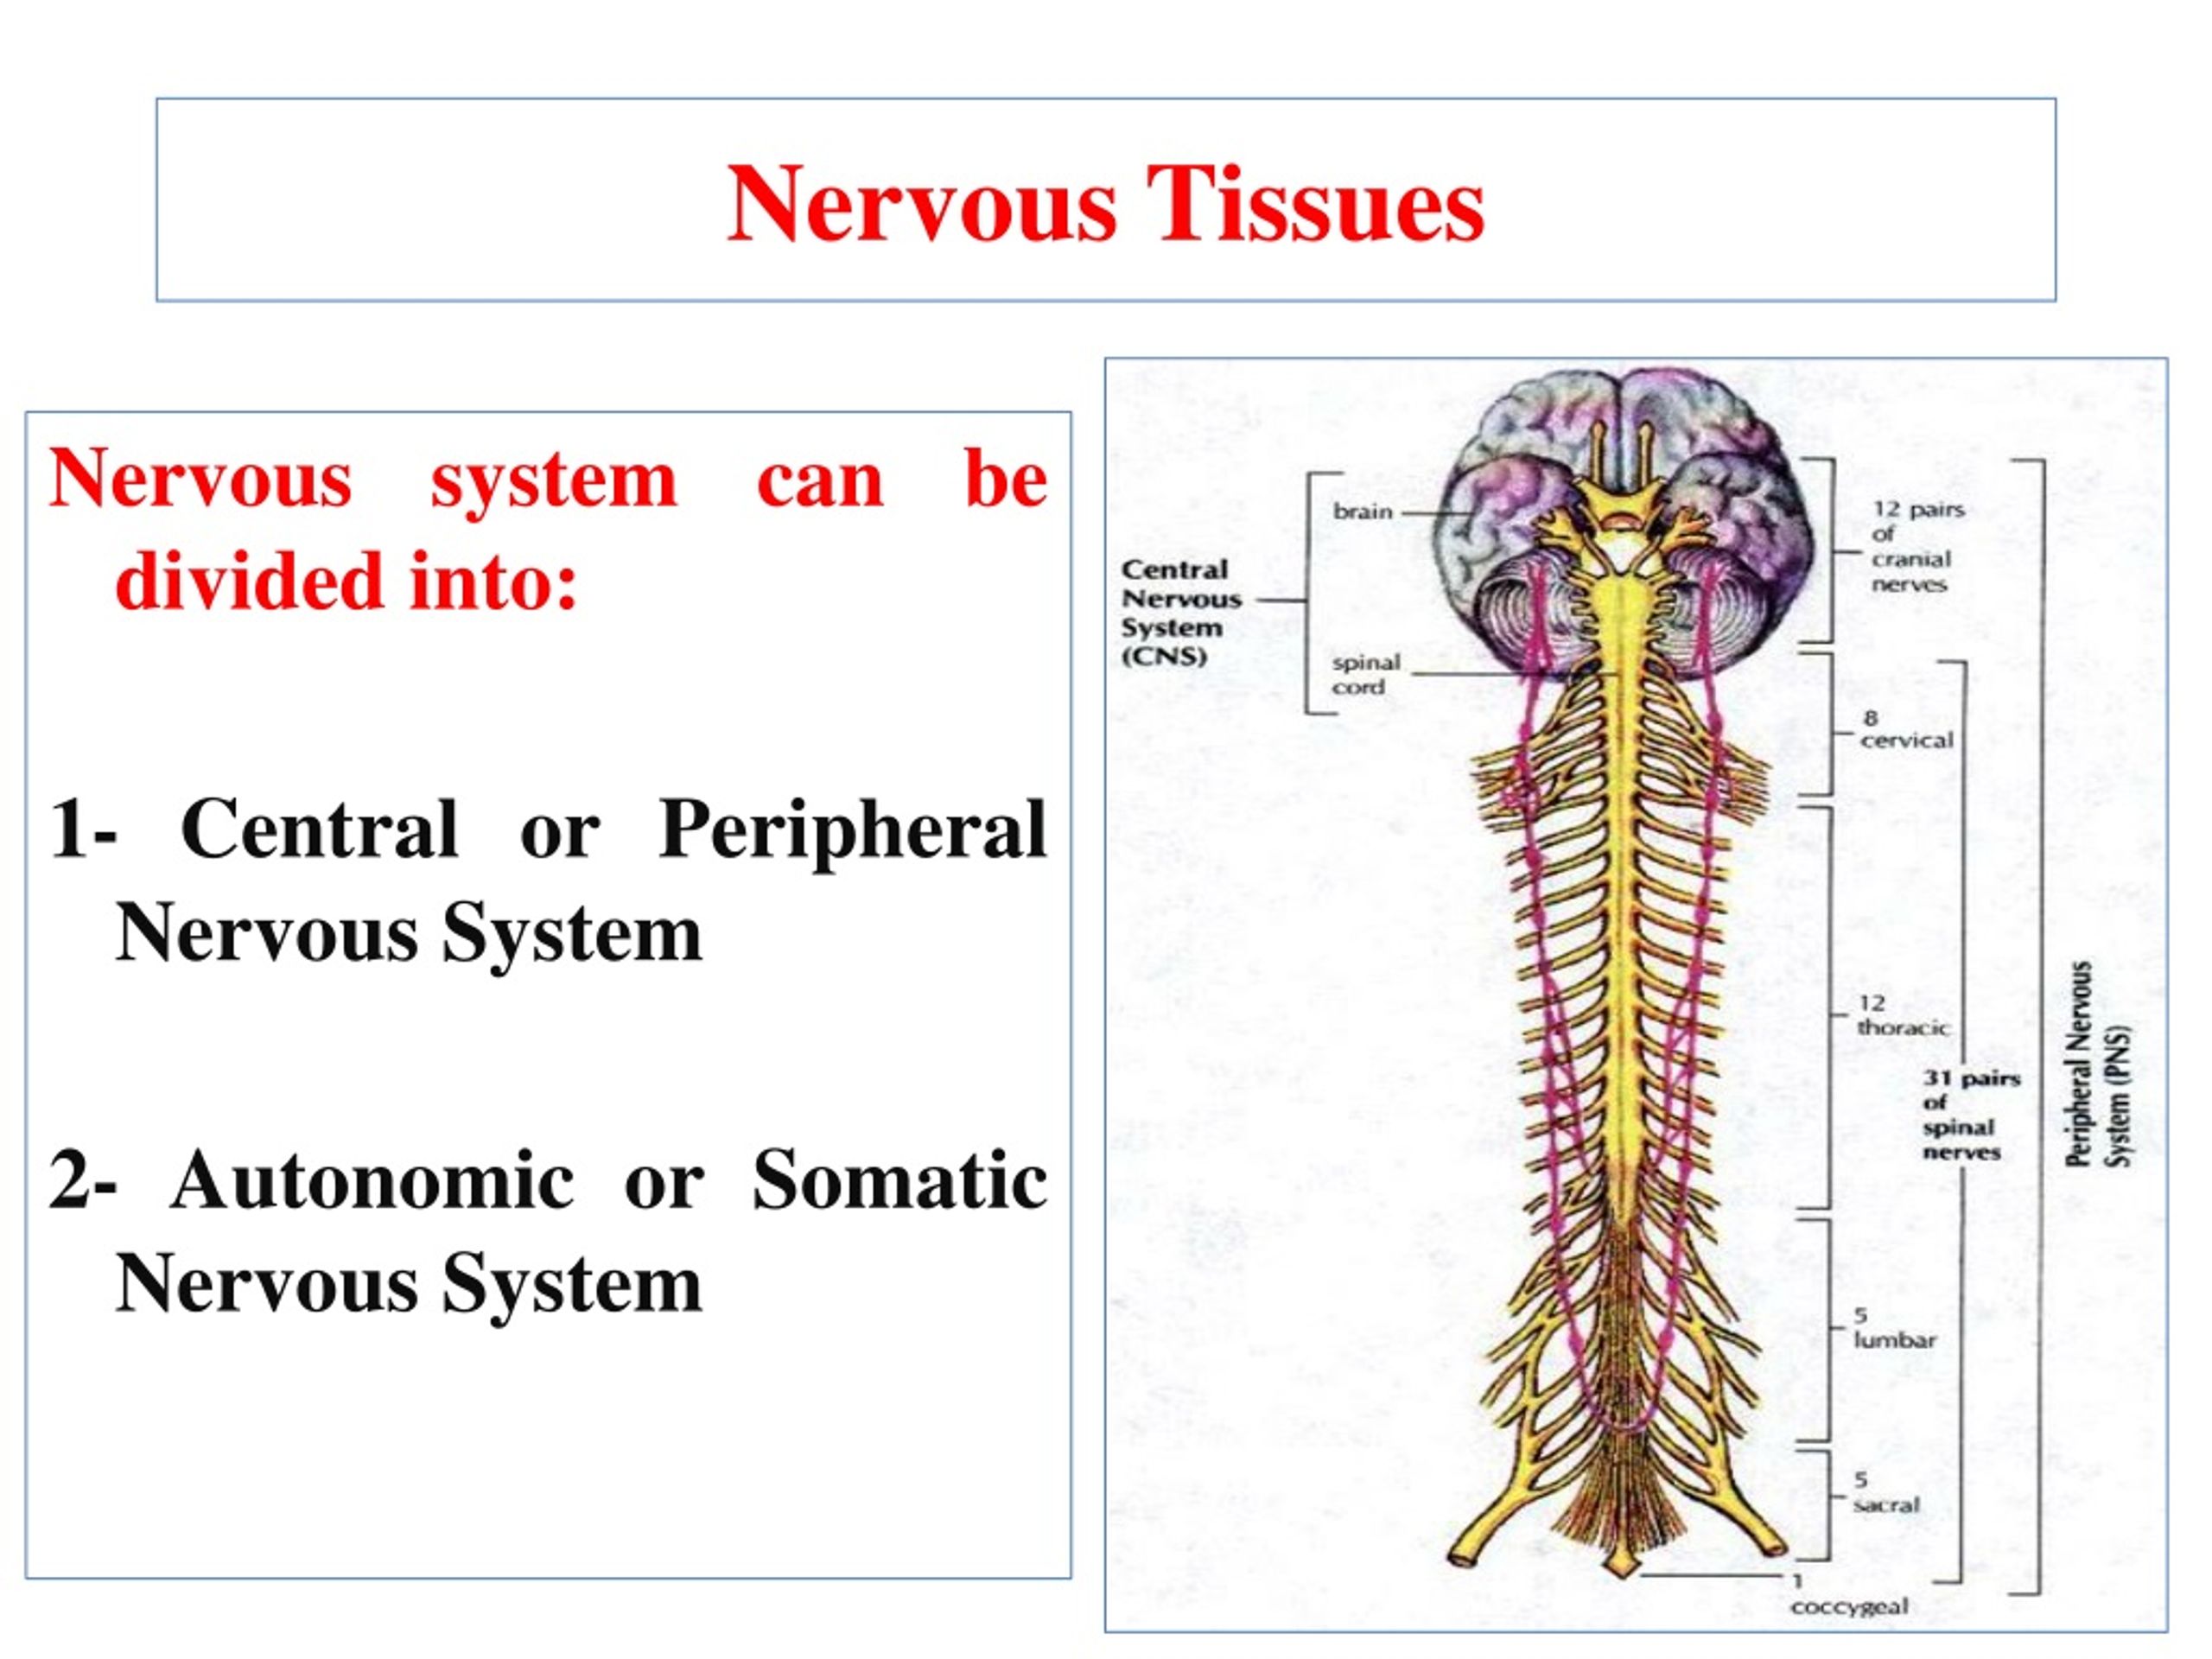 PPT - Nervous system can be divided into: 1- Central or Peripheral